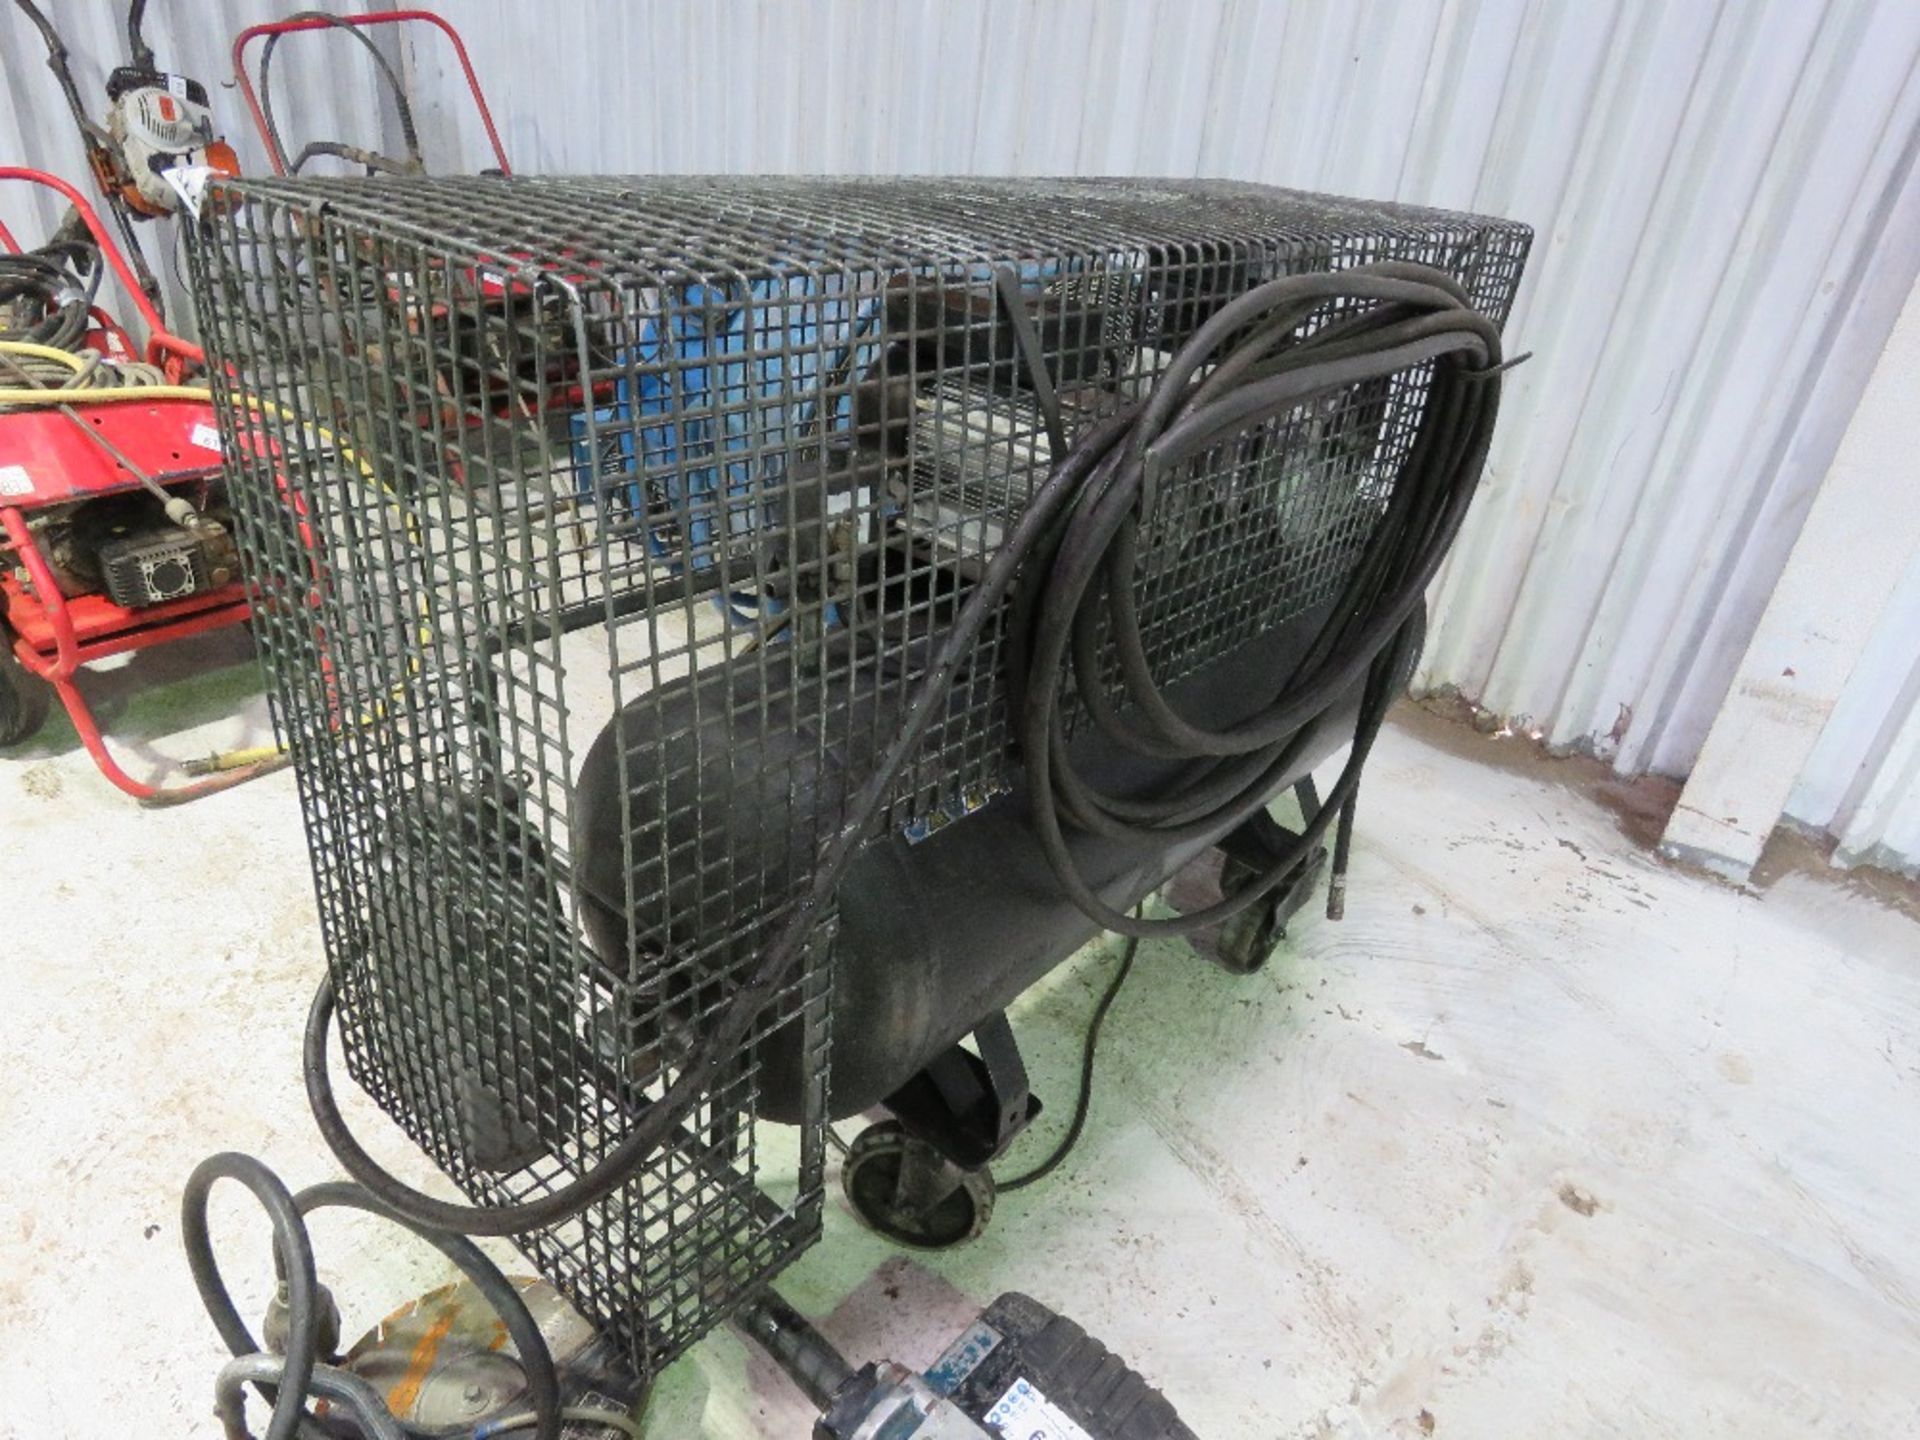 LARGE SIZED AIR COMPRESSOR ON WHEELS, 240VOLT POWERED - Image 2 of 6